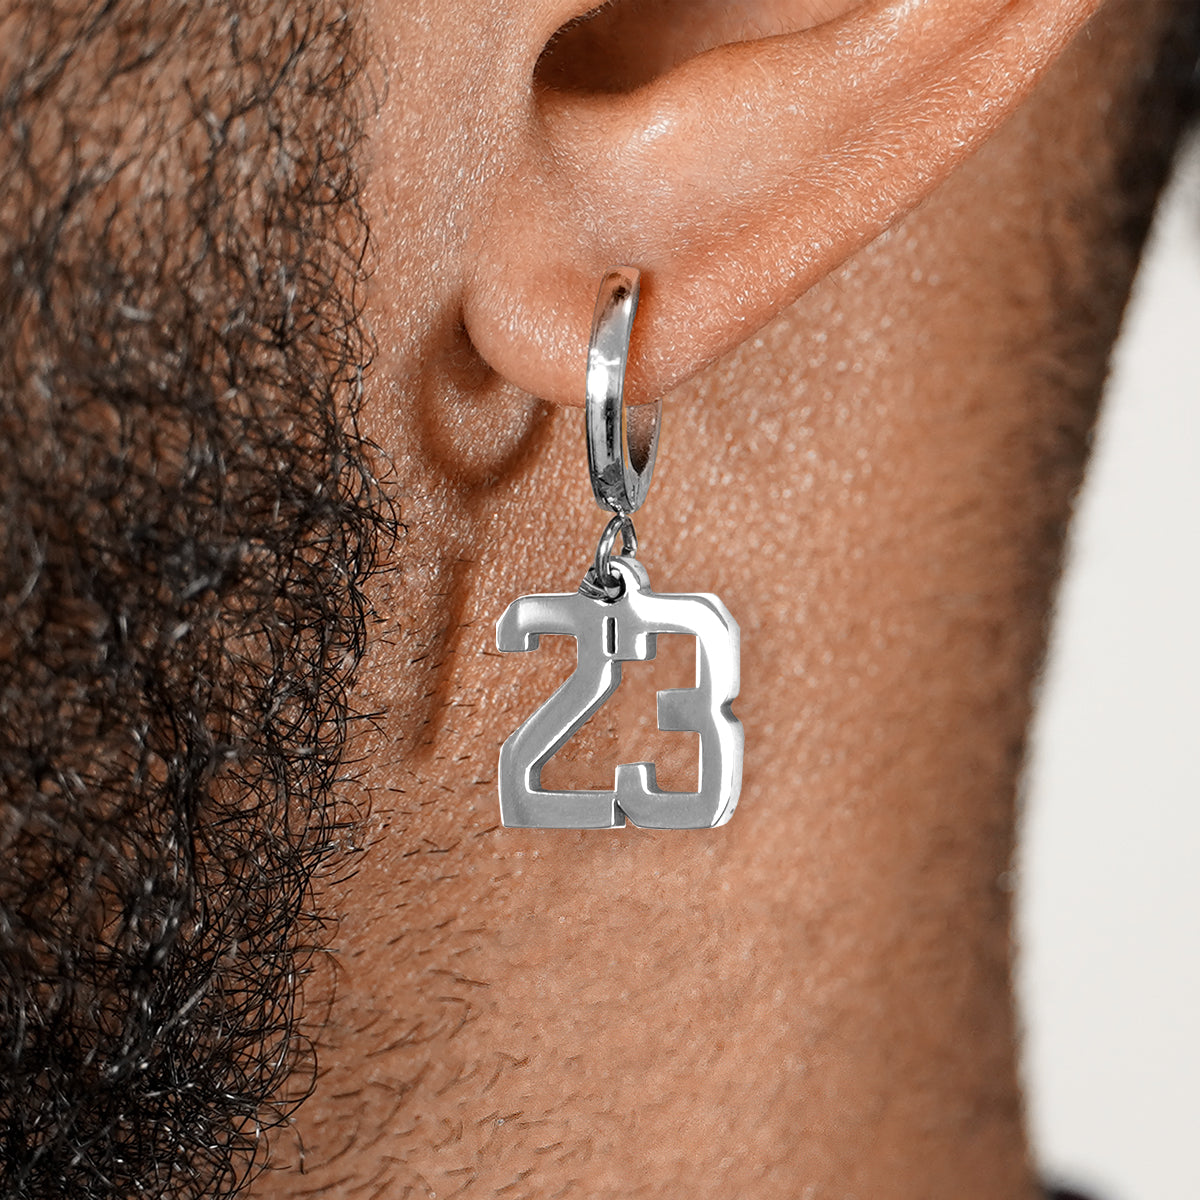 23 Number Earring - Stainless Steel